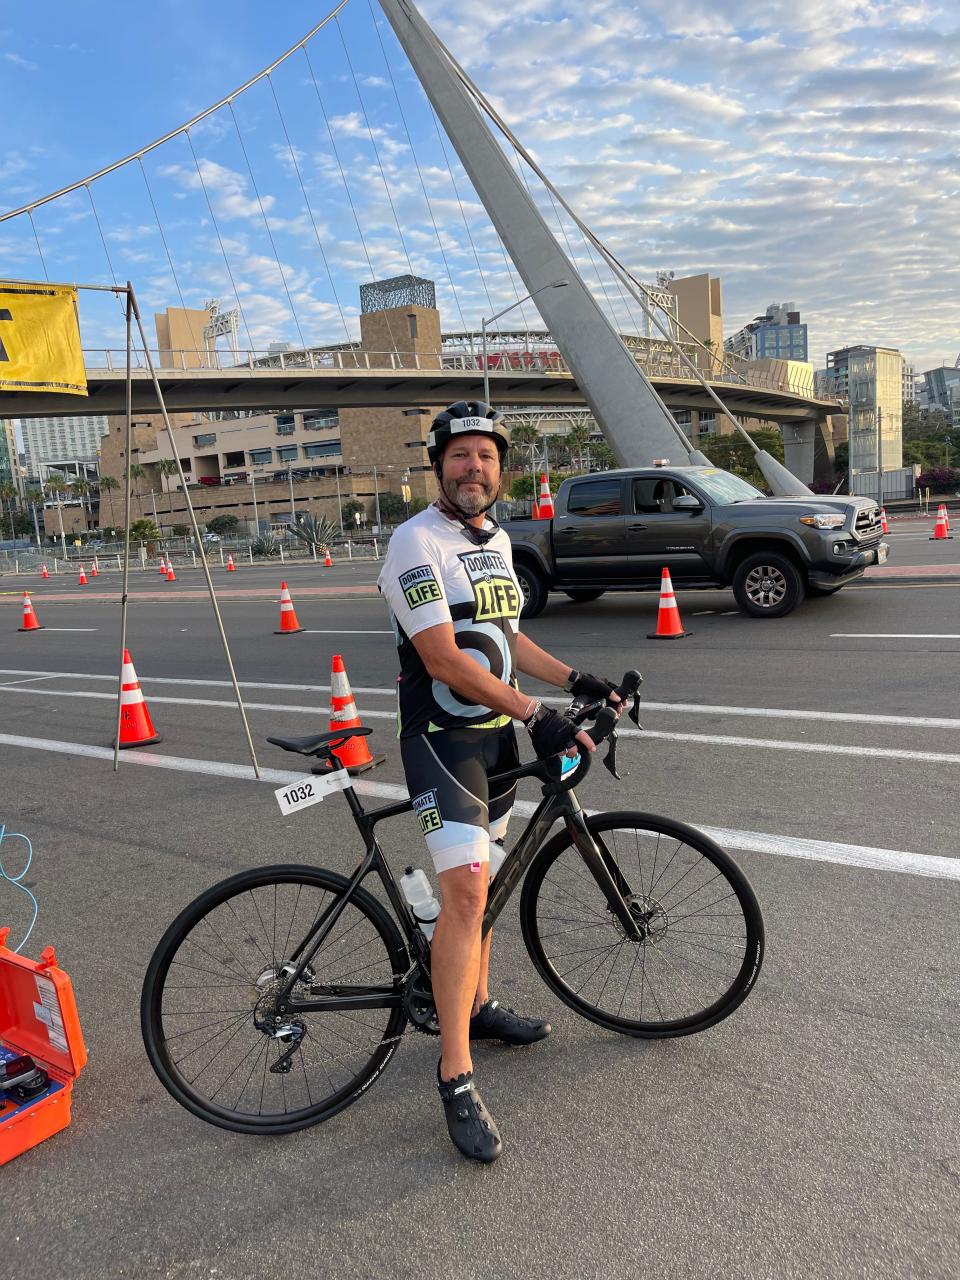 Matt Hudson was back to riding a bike two months after he got out of the hospital after a heart transplant. He competed in the Transplant Games last summer.